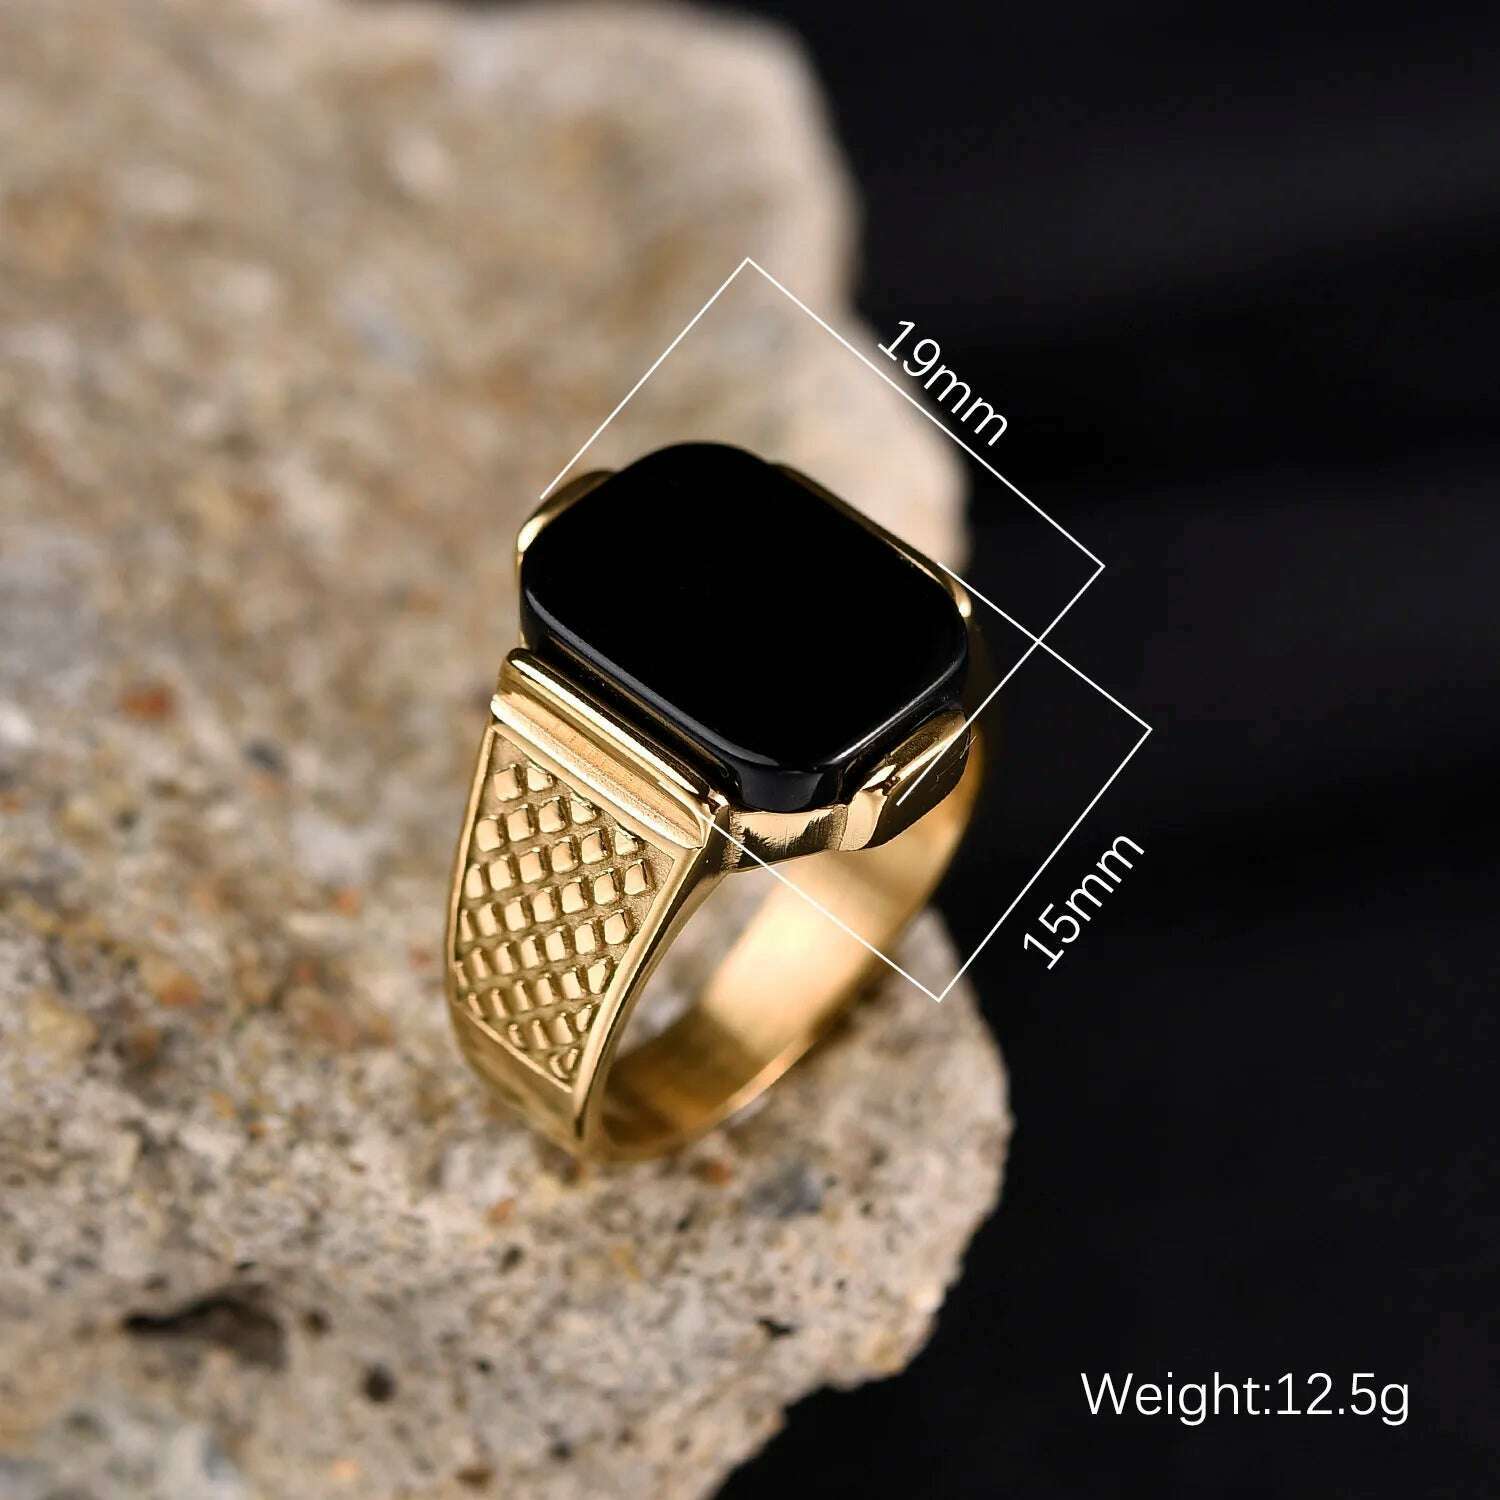 Men's High Quality Vintage Stainless Steel Gemstone Styles 18K Gold Plated Ring Jewelry Professional Factory Made, KIMLUD Women's Clothes